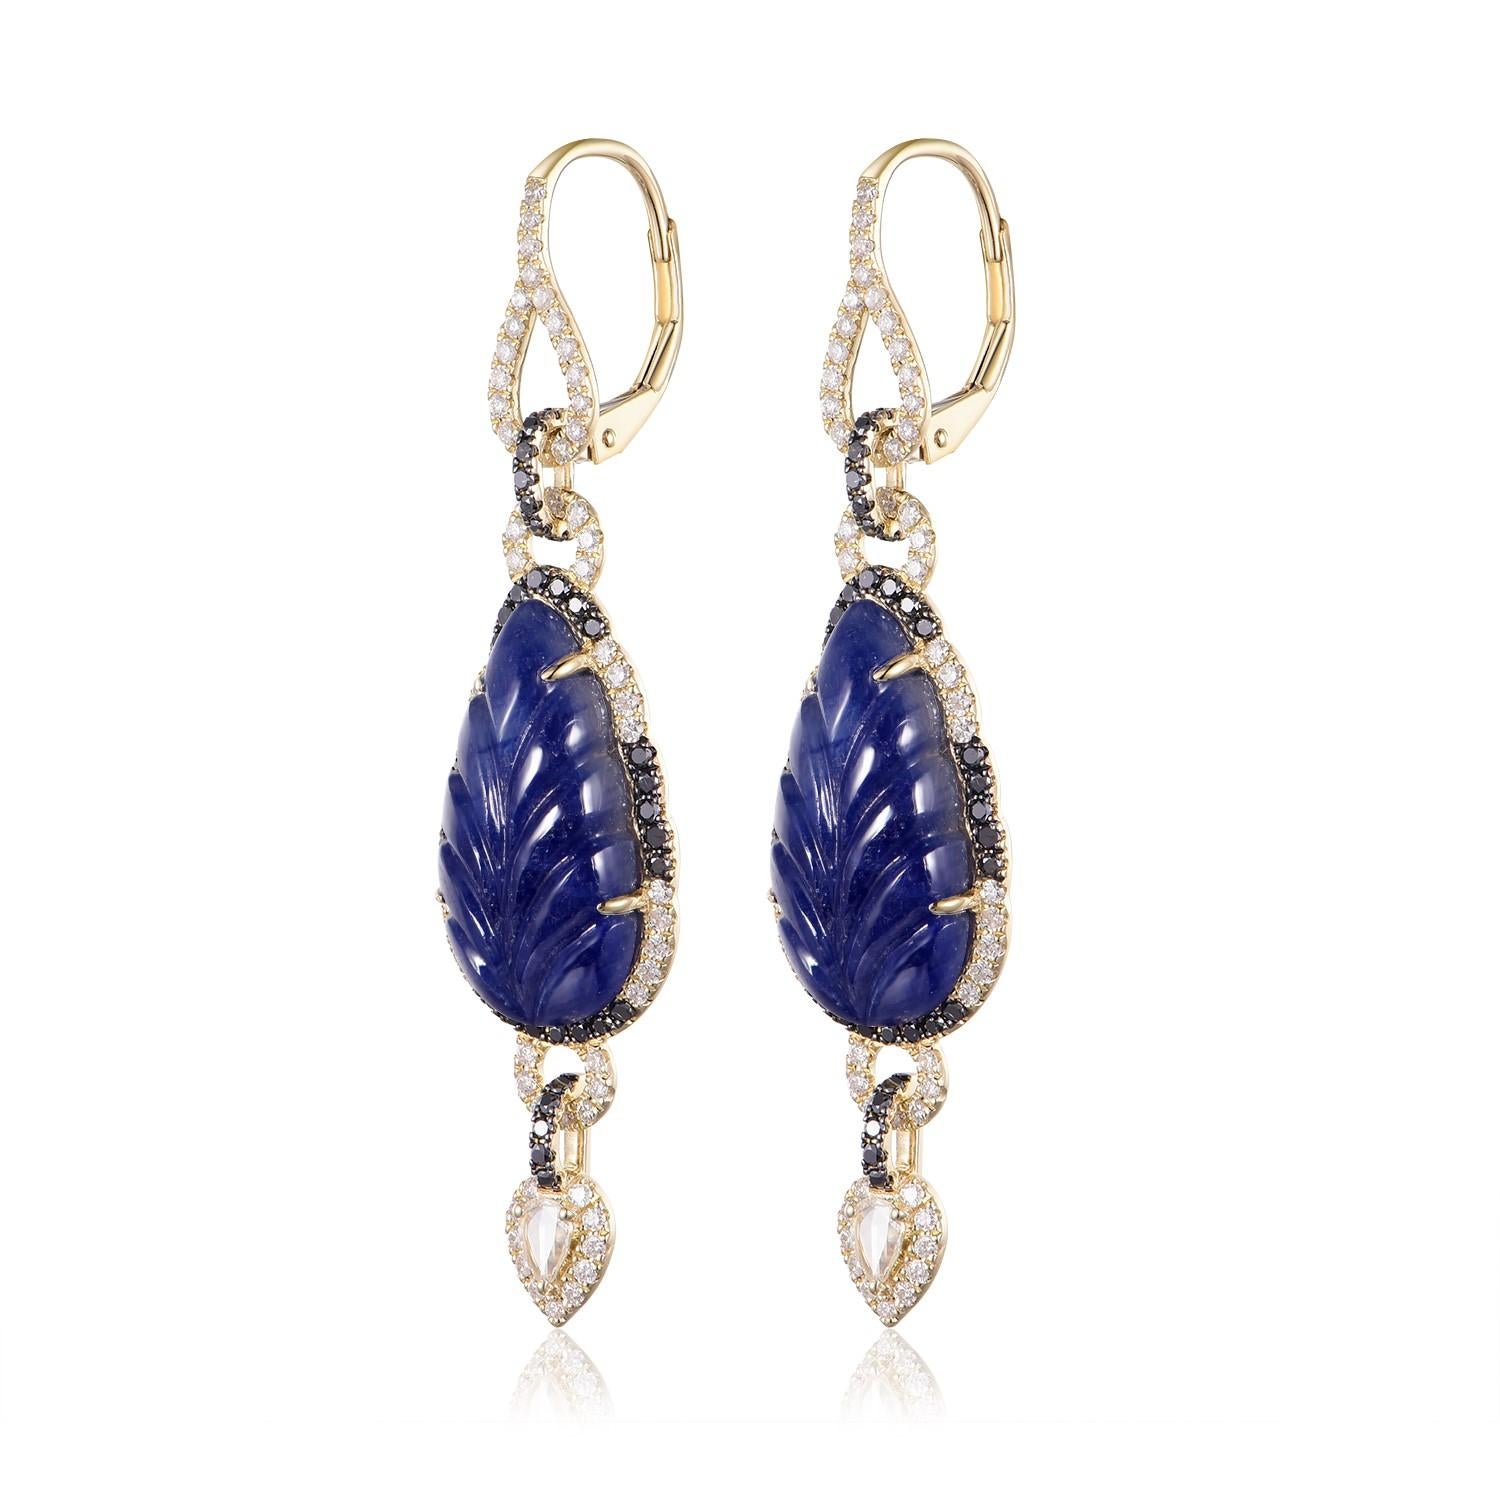 Unveil the essence of sophistication with these captivating earrings, each graced with a masterfully carved leaf-shaped sapphire, totaling a remarkable 16.62 carats for the pair. The sapphires exude a rich, velvety blue, encapsulating the depth of a